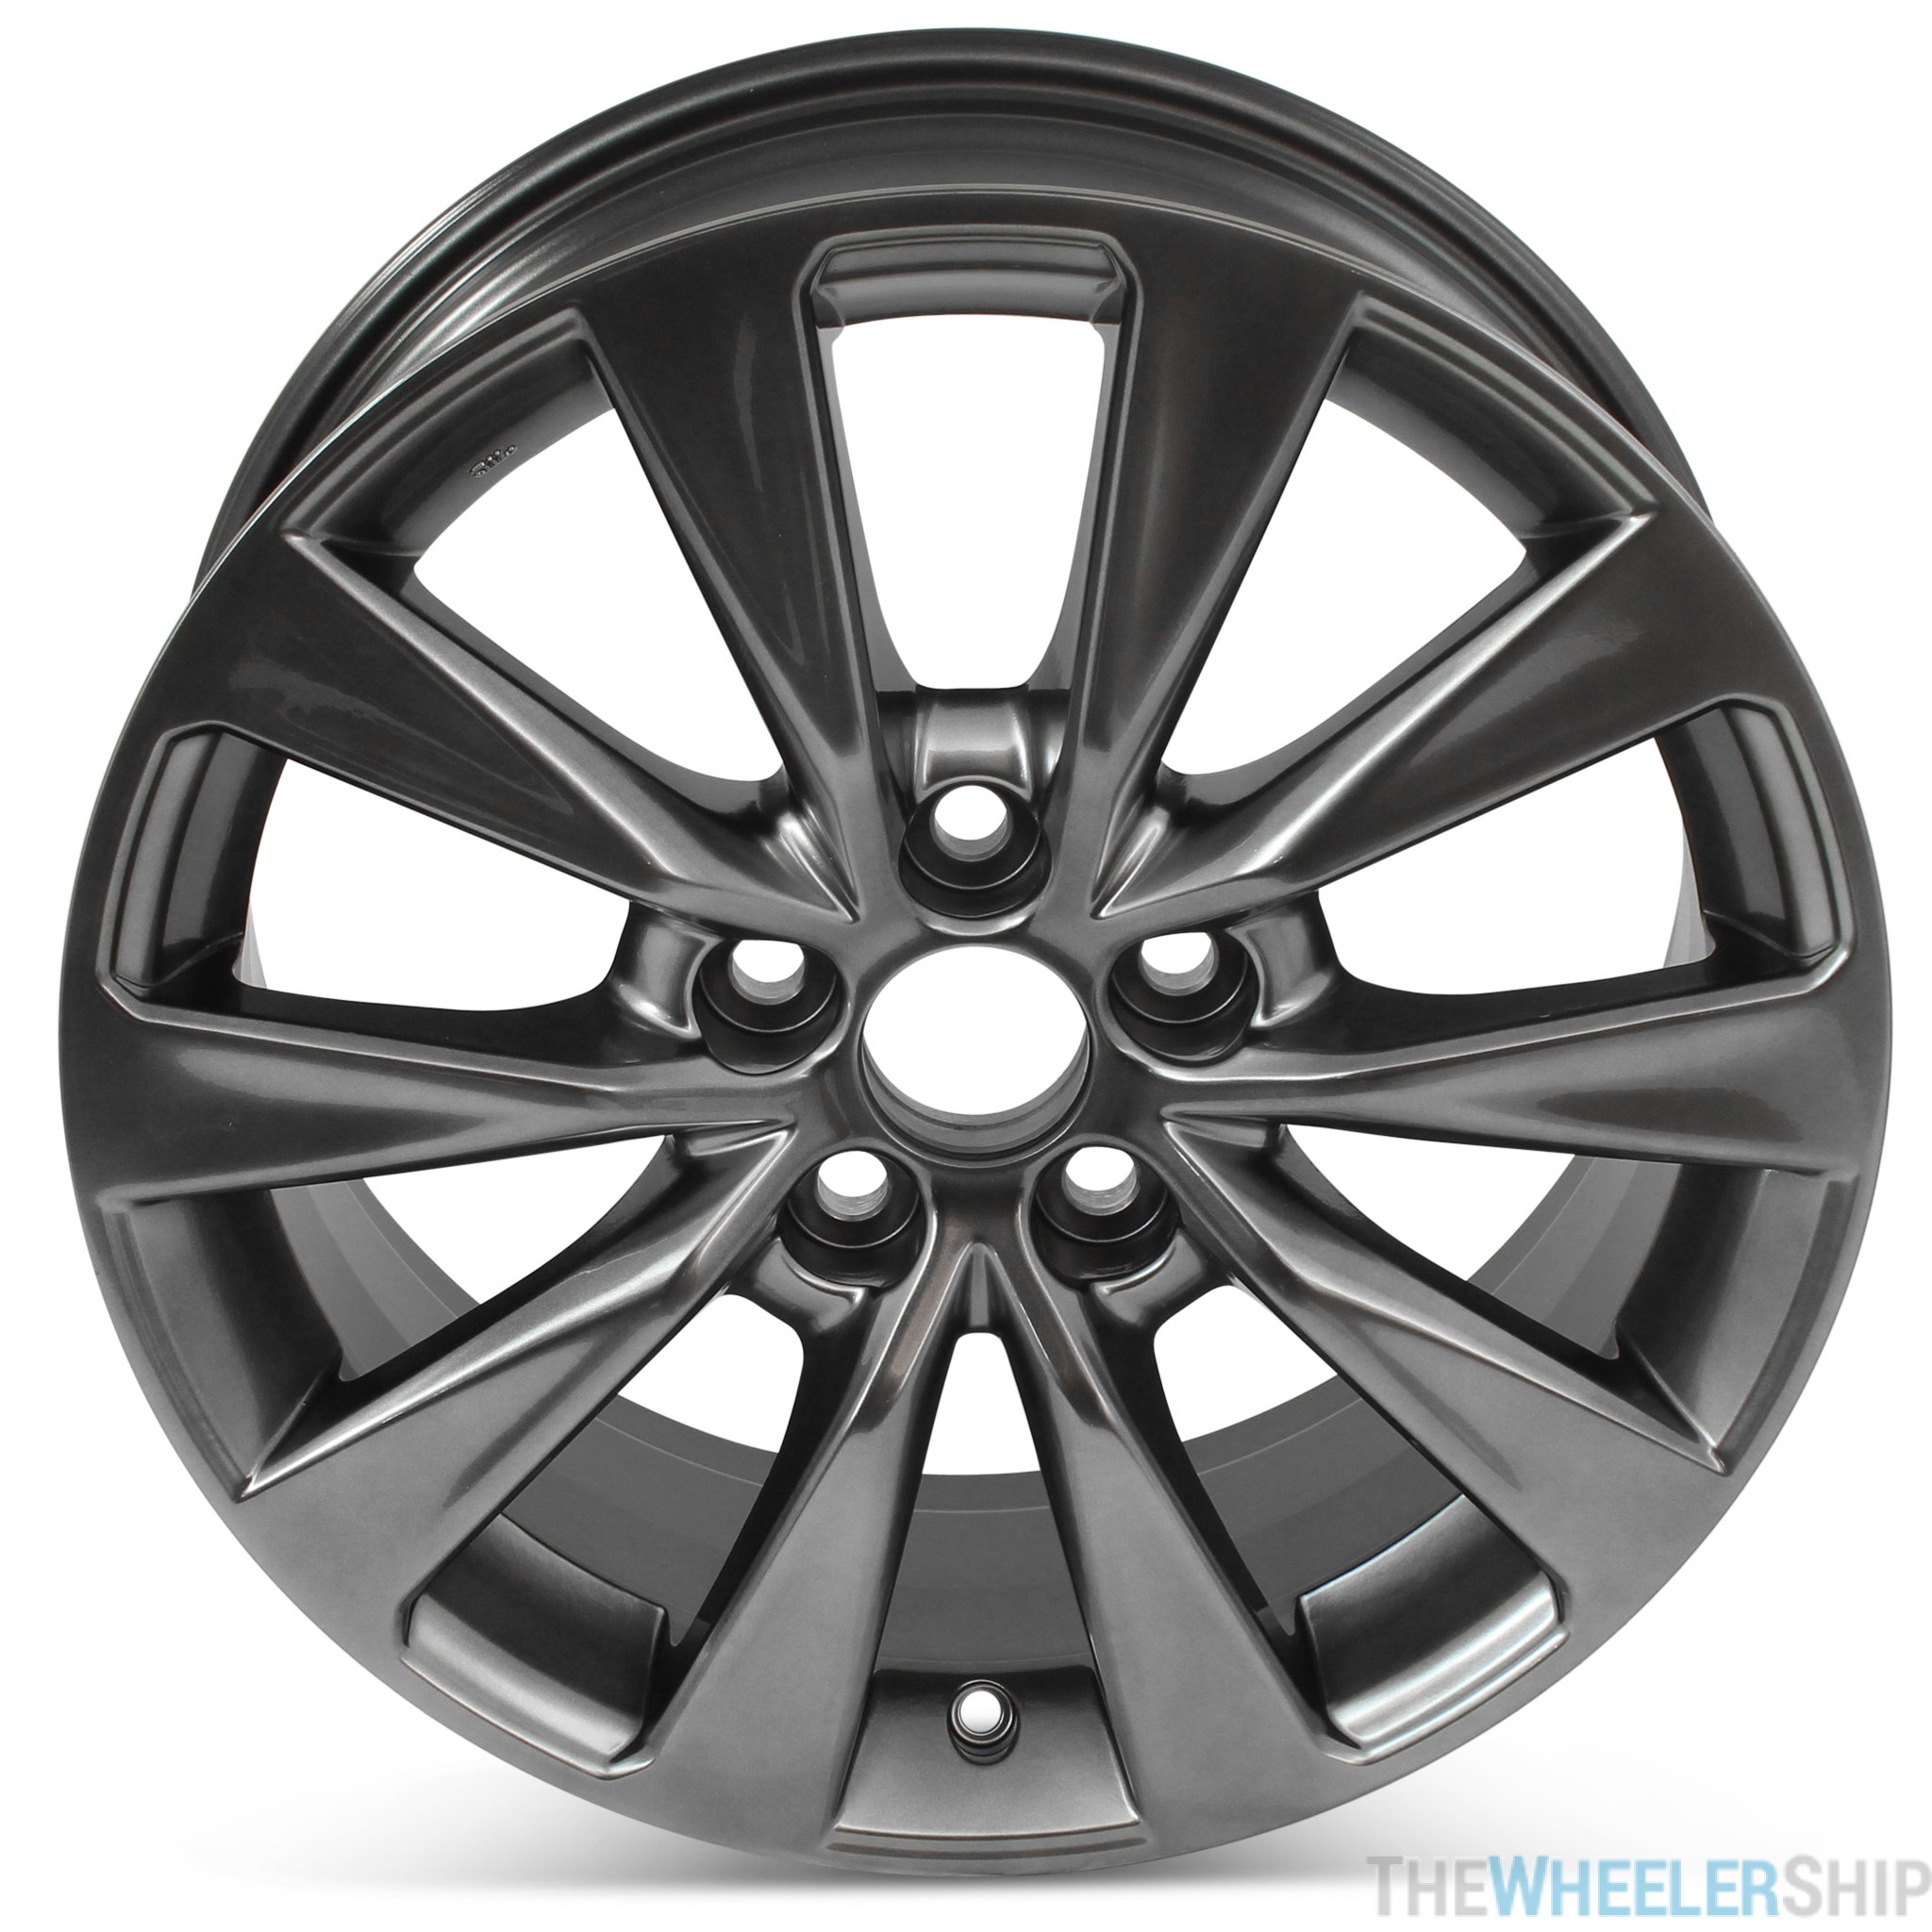 New 17" x 7" Replacement Wheel for Toyota Camry 2015 2016 2017 Rim 75170